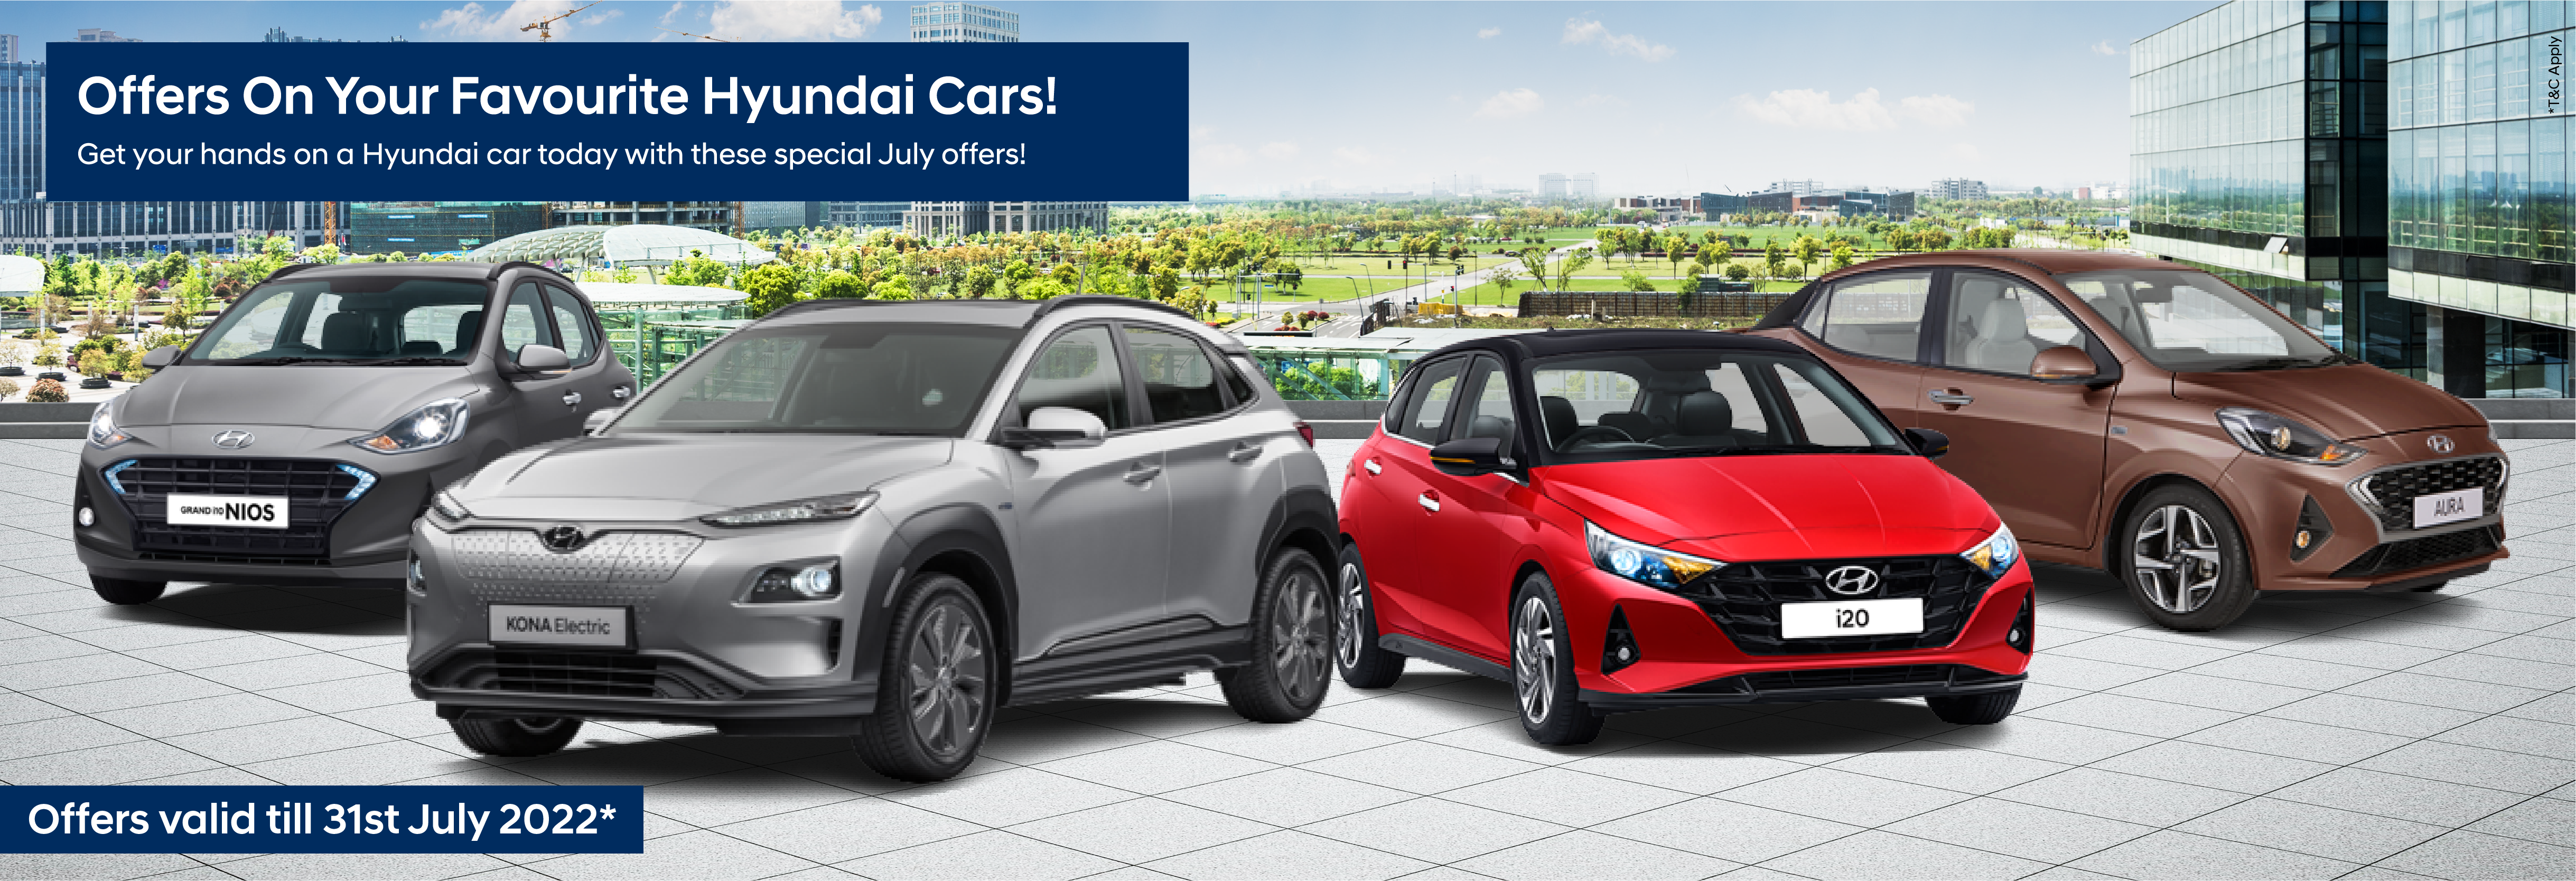 Hyundai Cars July 2022 Discounts and Offers